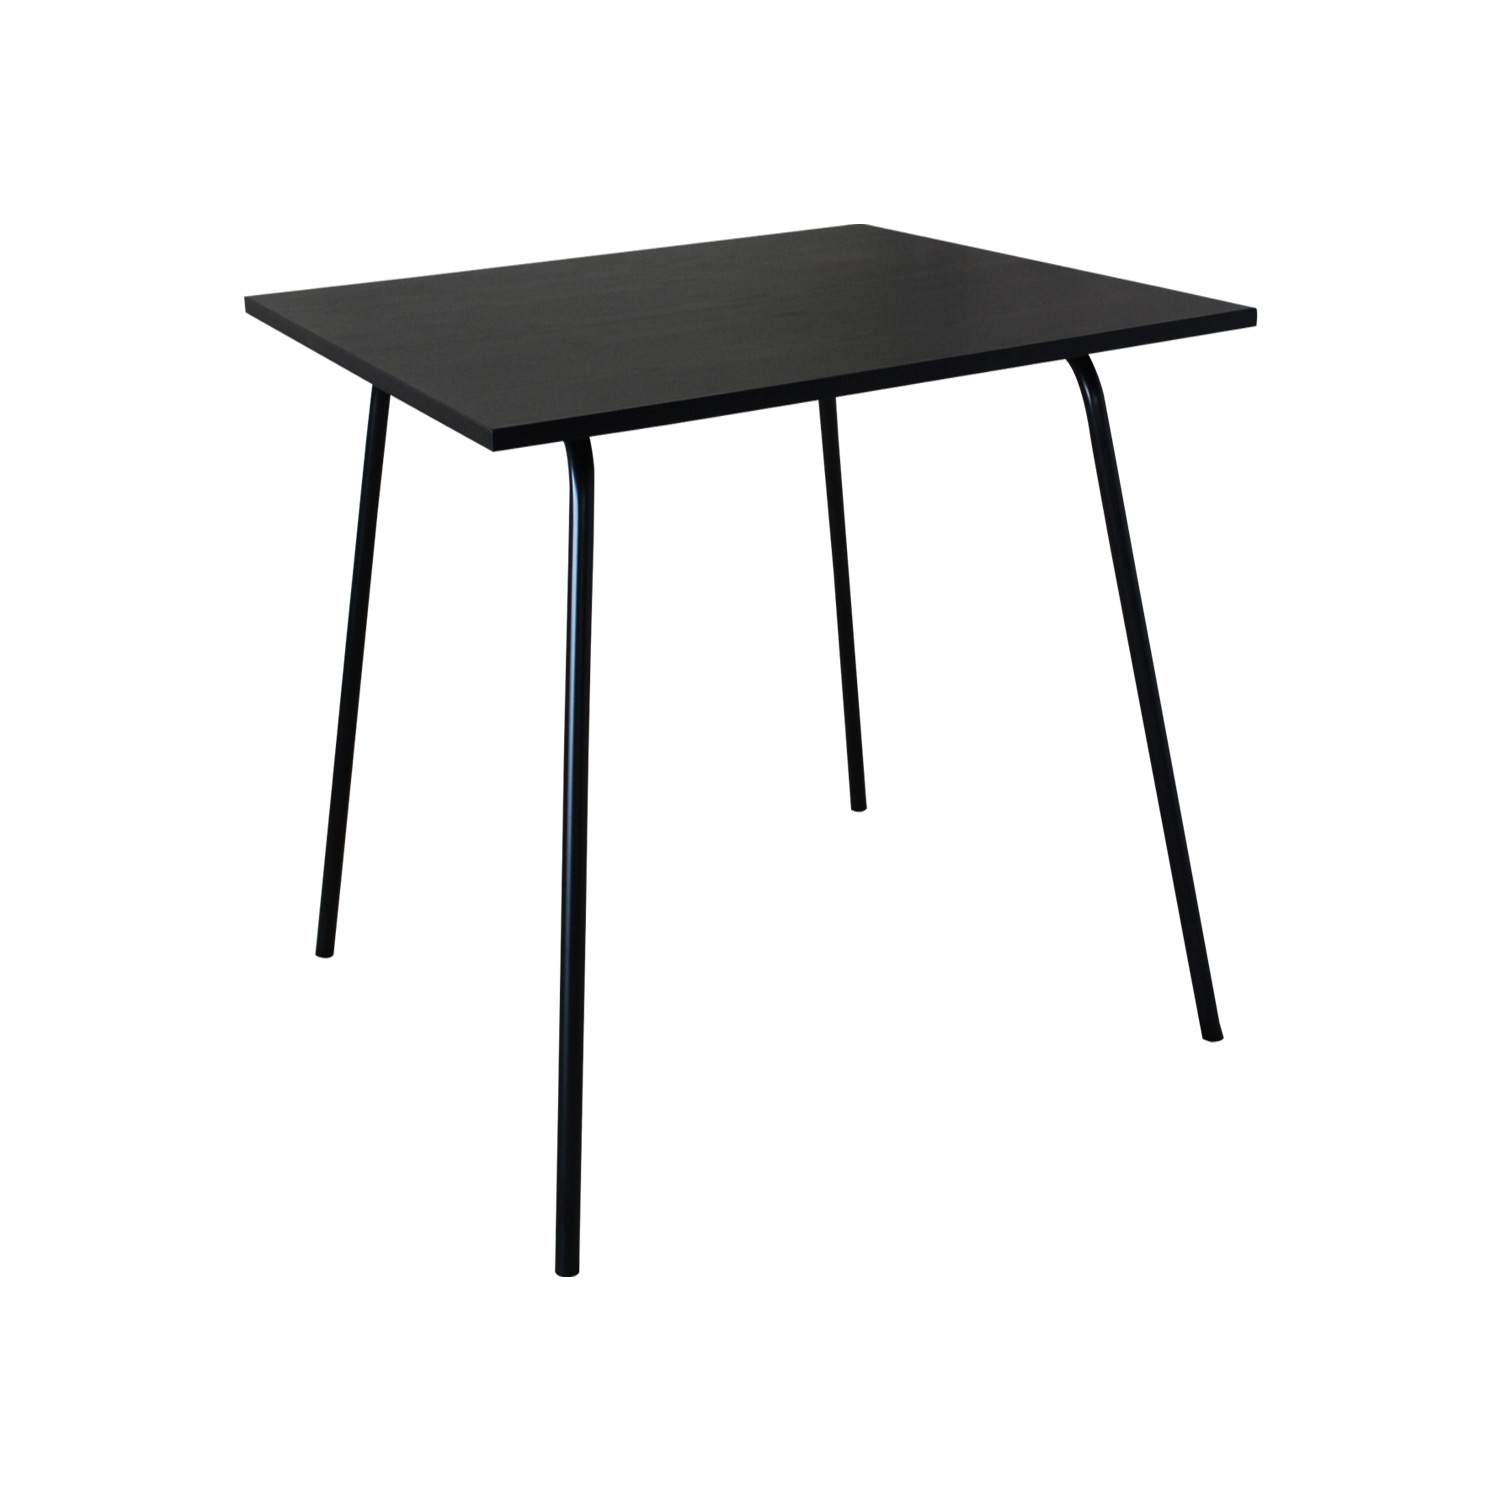 Elliot Black Two Seater Dining Table